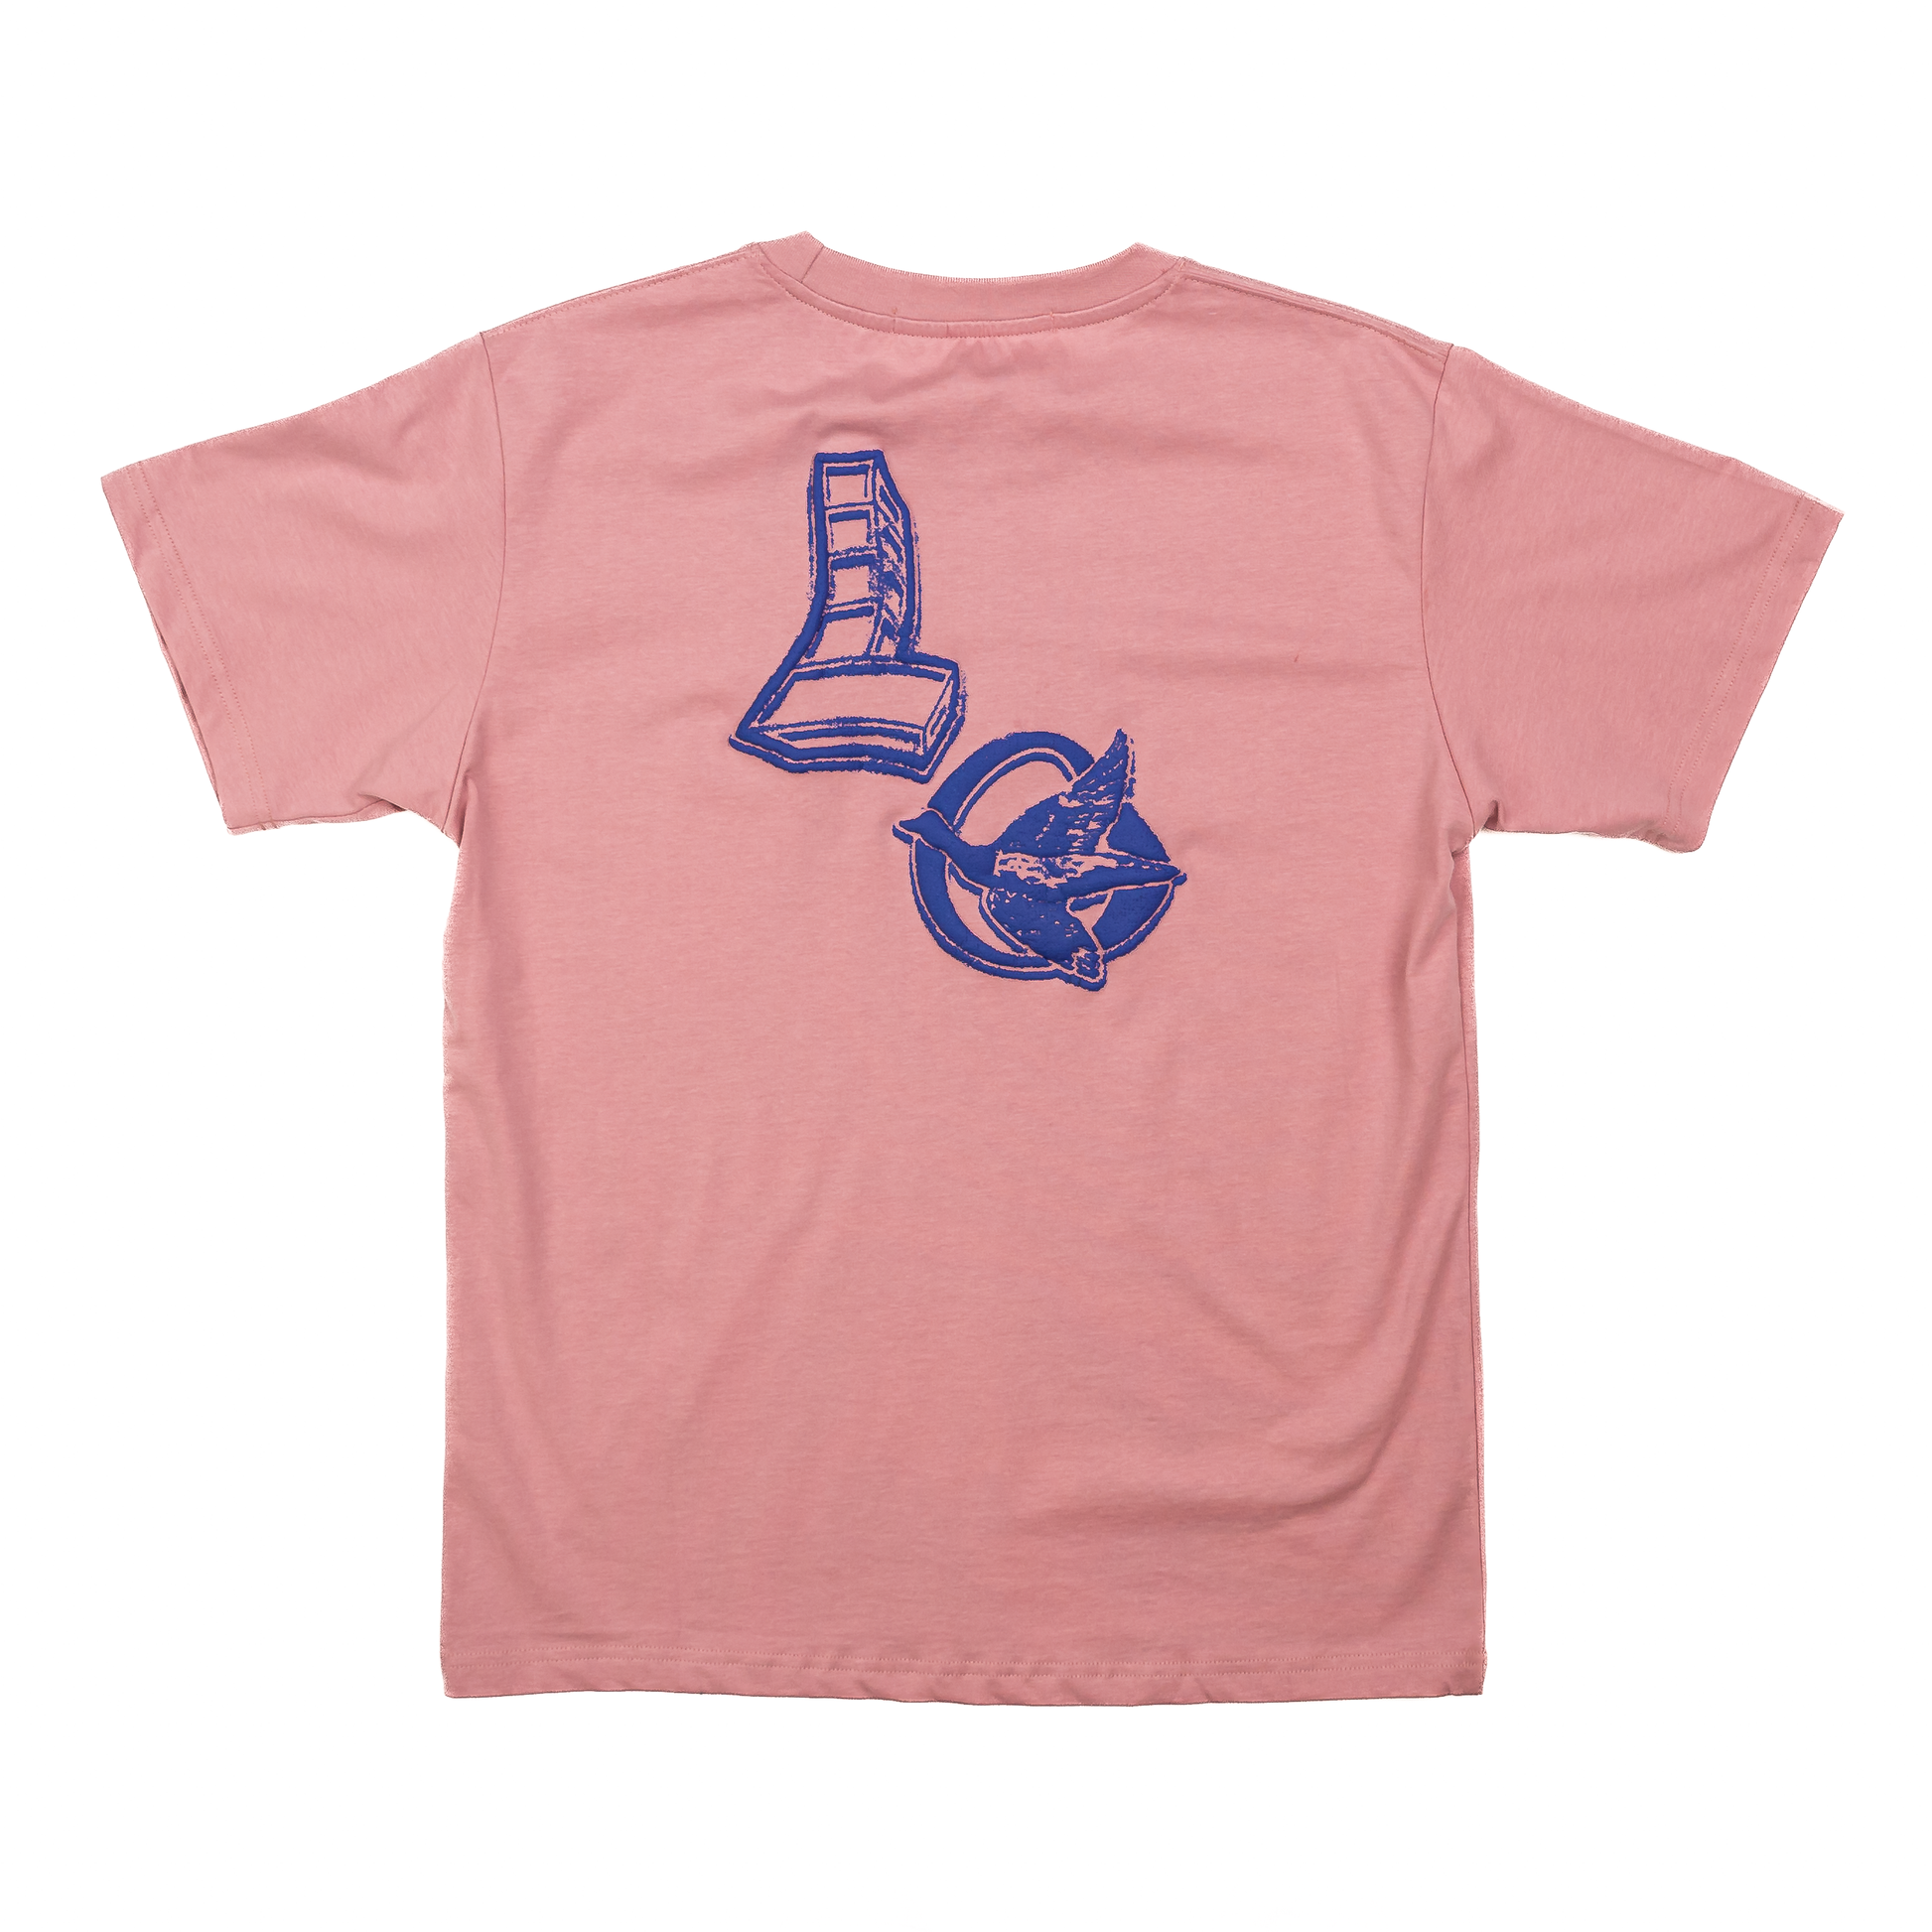 New LO Tee, Washed Pink - Layr Official